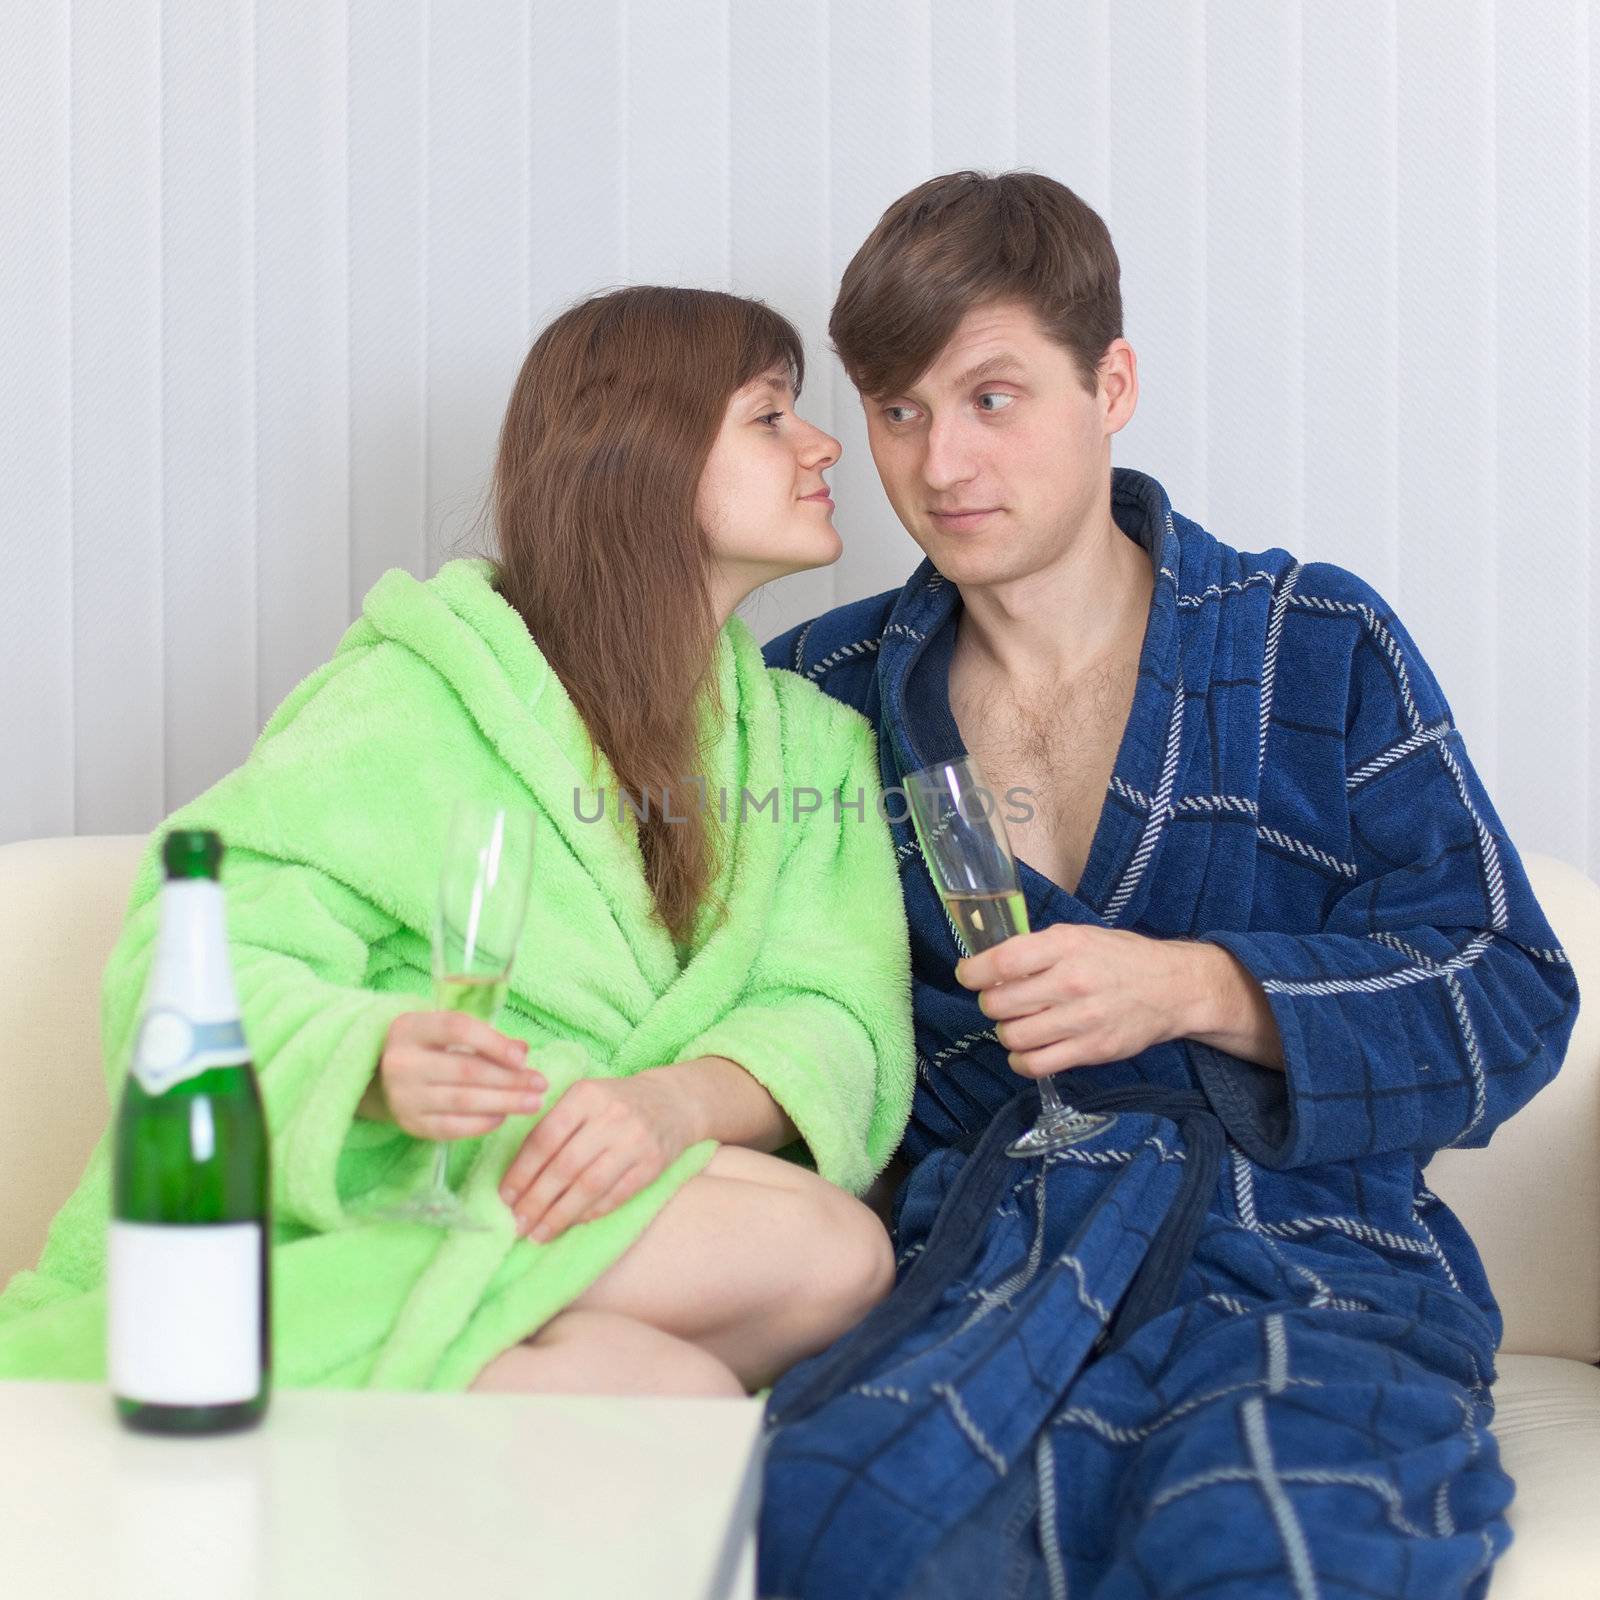 Guy and girl drink champagne wine on a sofa by pzaxe